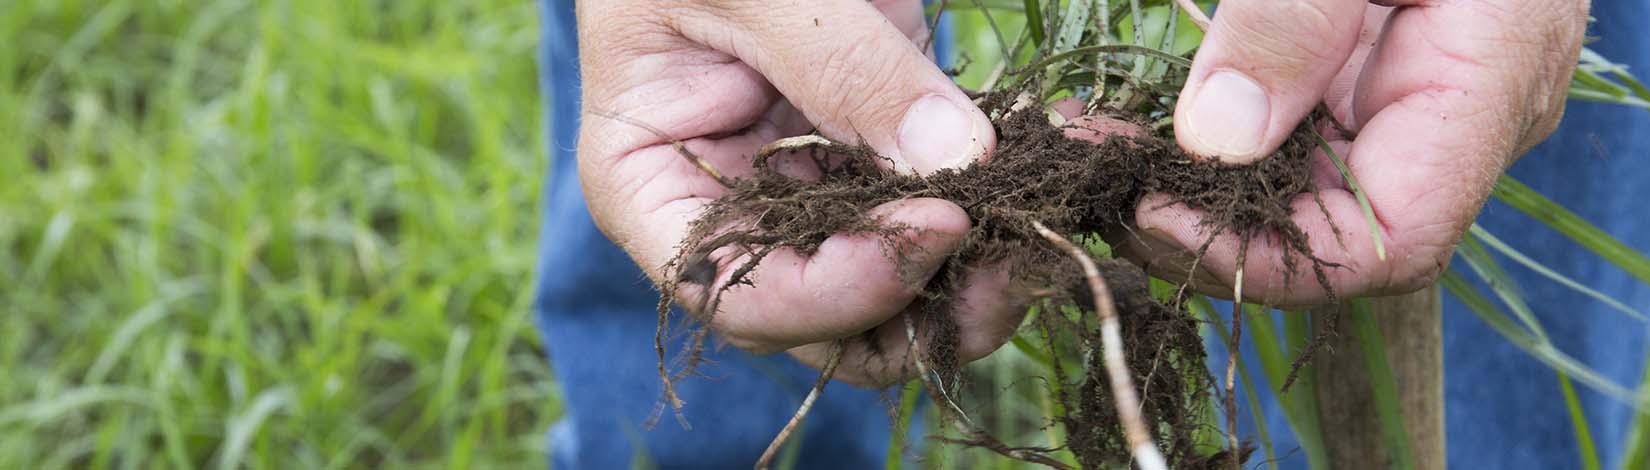 Hands holding plant roots while organic gardening